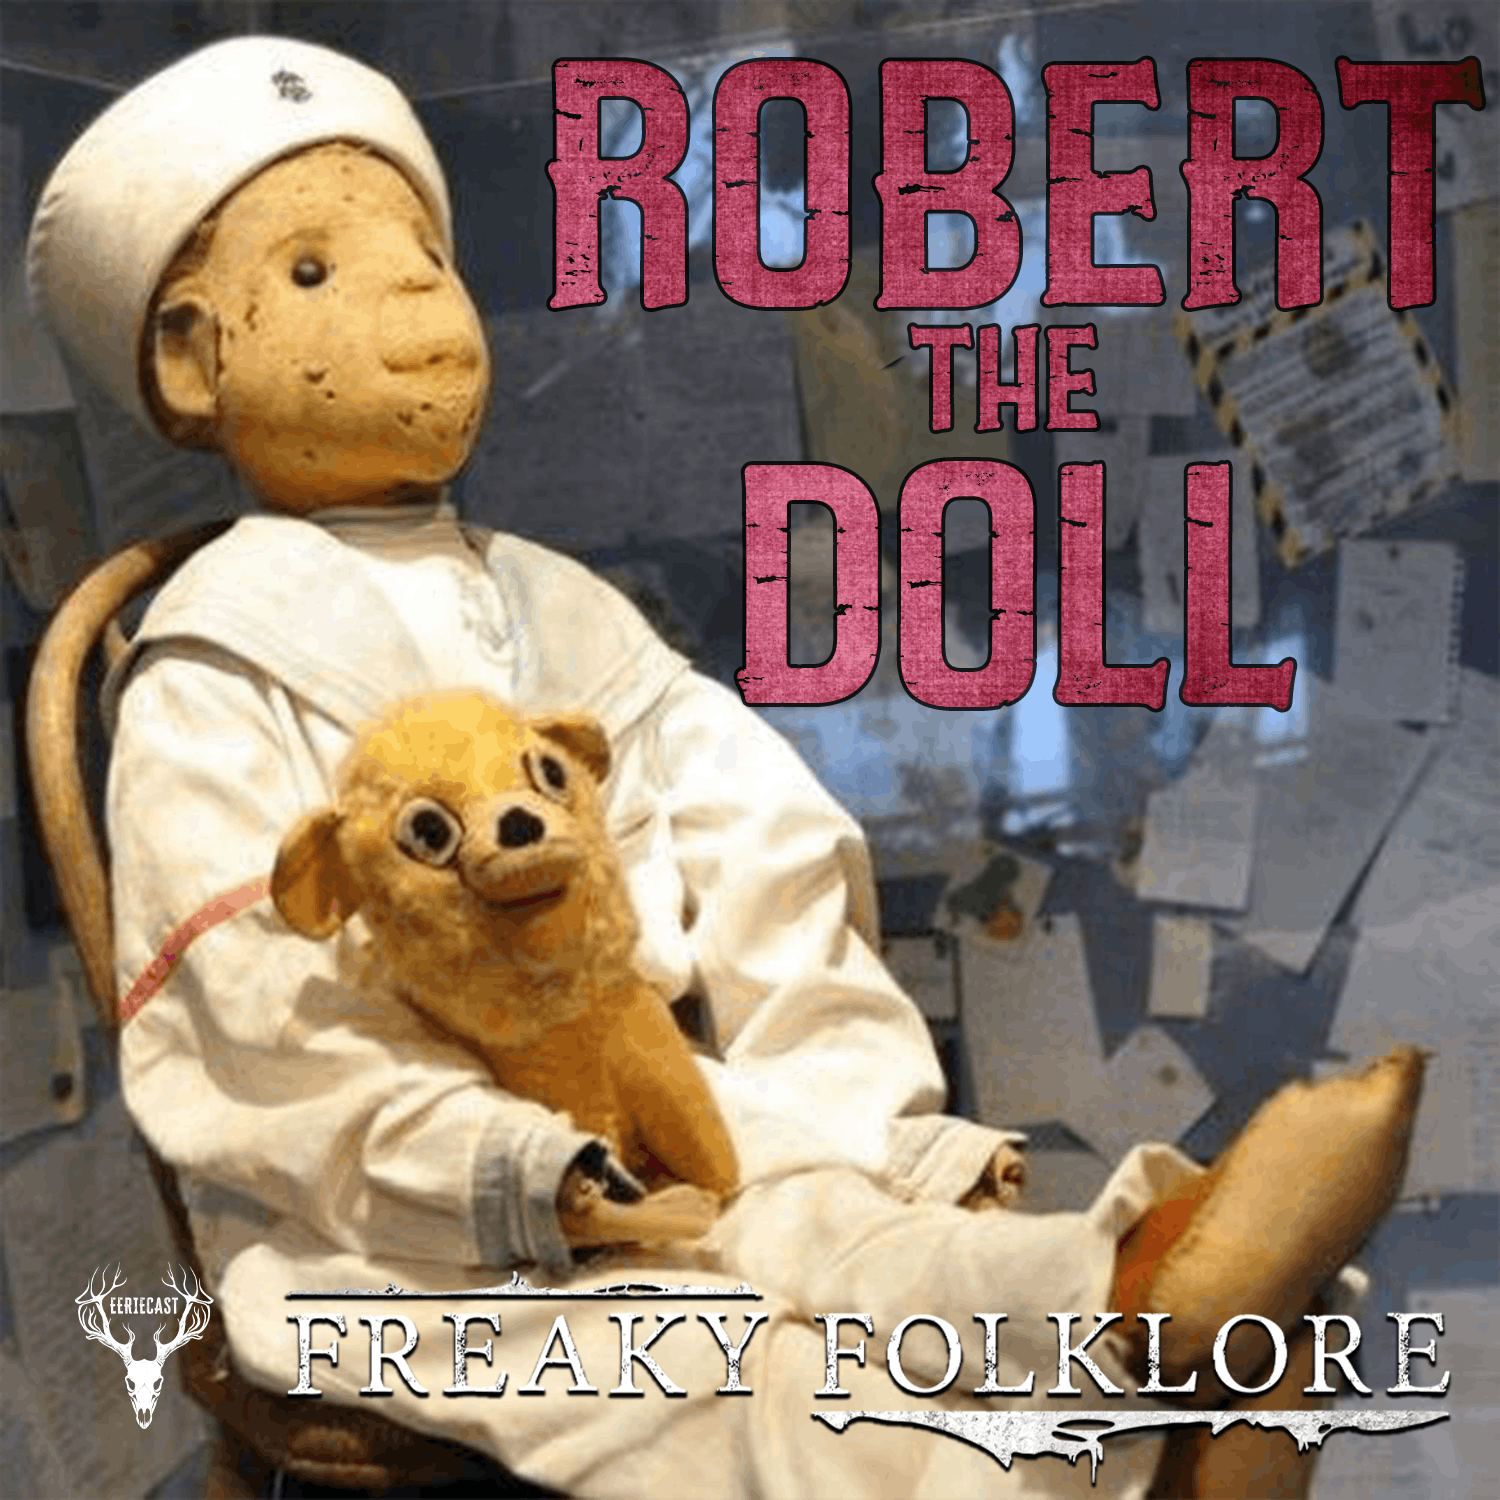 ROBERT THE DOLL – Cursed Childhood Plaything